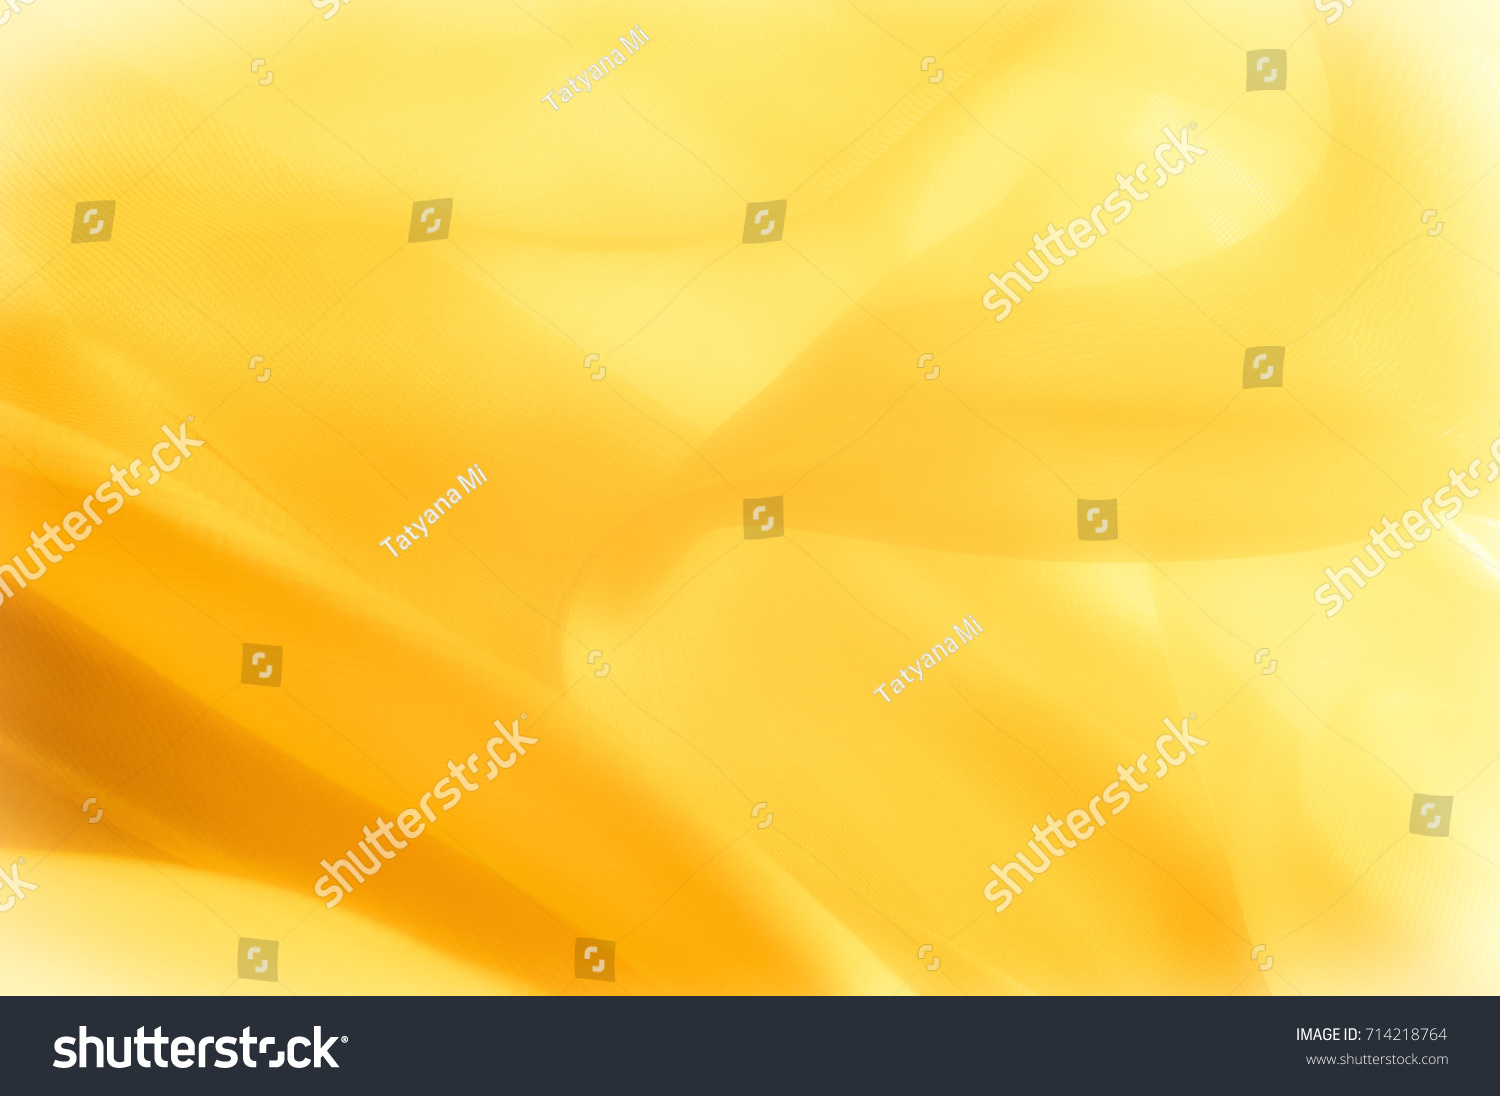 The photo is blurred. Texture, background, pattern. Yellow silk fabric. Abstract background of luxury Yellow fabric or liquid wave or wavy grunge texture. The whole background. #714218764